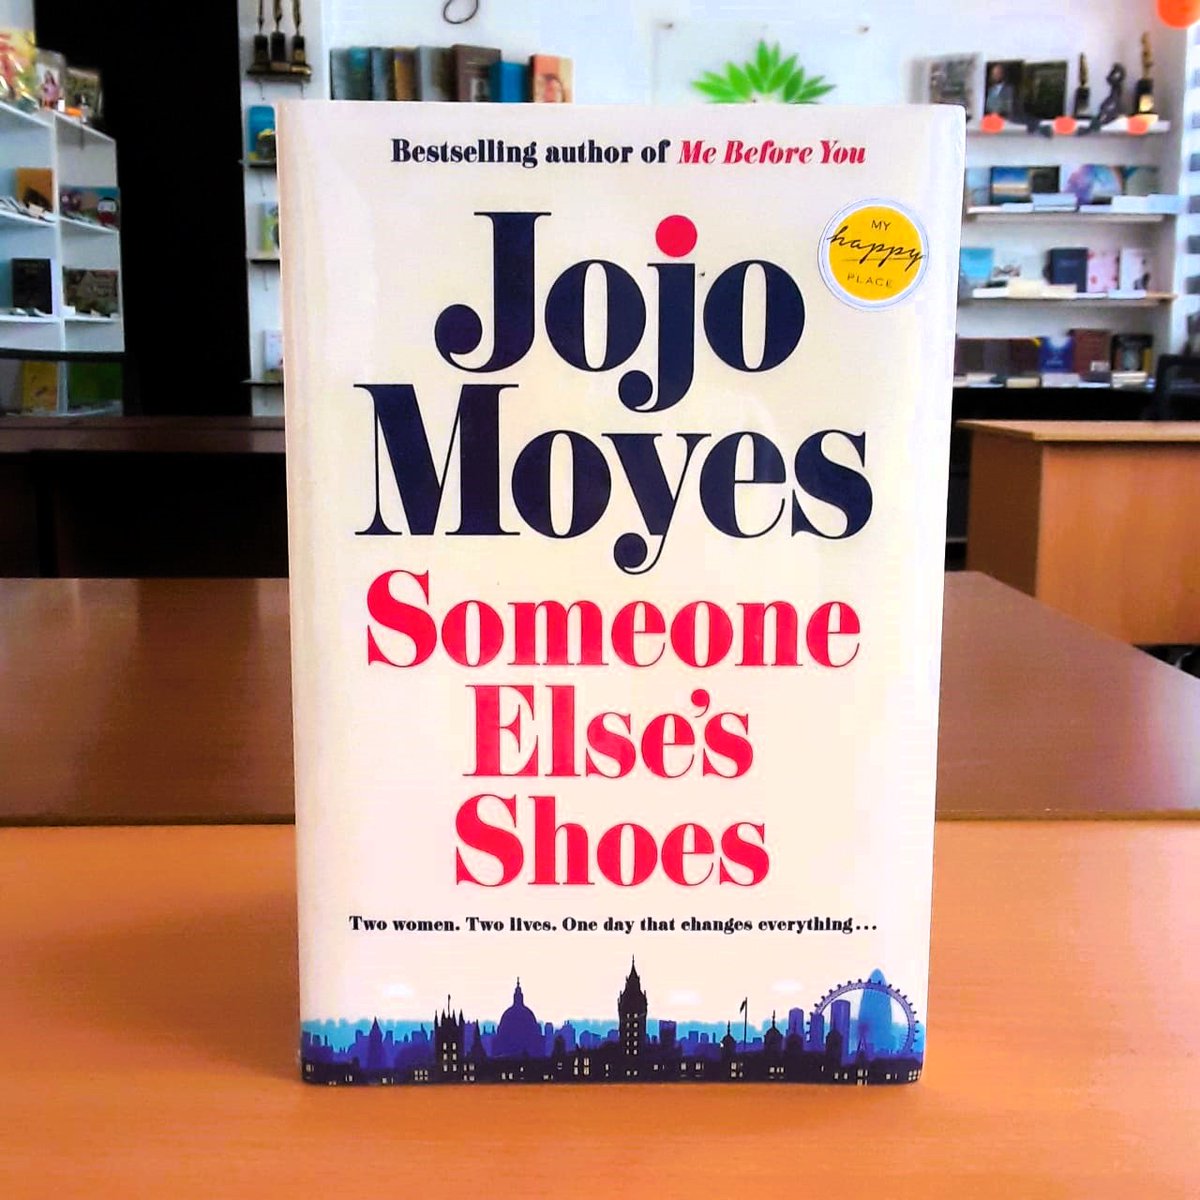 Someone Else's Shoes
Rs. 4,500
Author: Jojo Moyes
Paperback: 480 pages

Call/Whatsapp 072-7268078 to order 
The Jam Fruit Tree. 366/1 Galle Road, Colpetty

#JojoMoyes #SomeoneElsesShoes #TheJamFruitTree #TheJamFruitTreeBookShop #TJFT